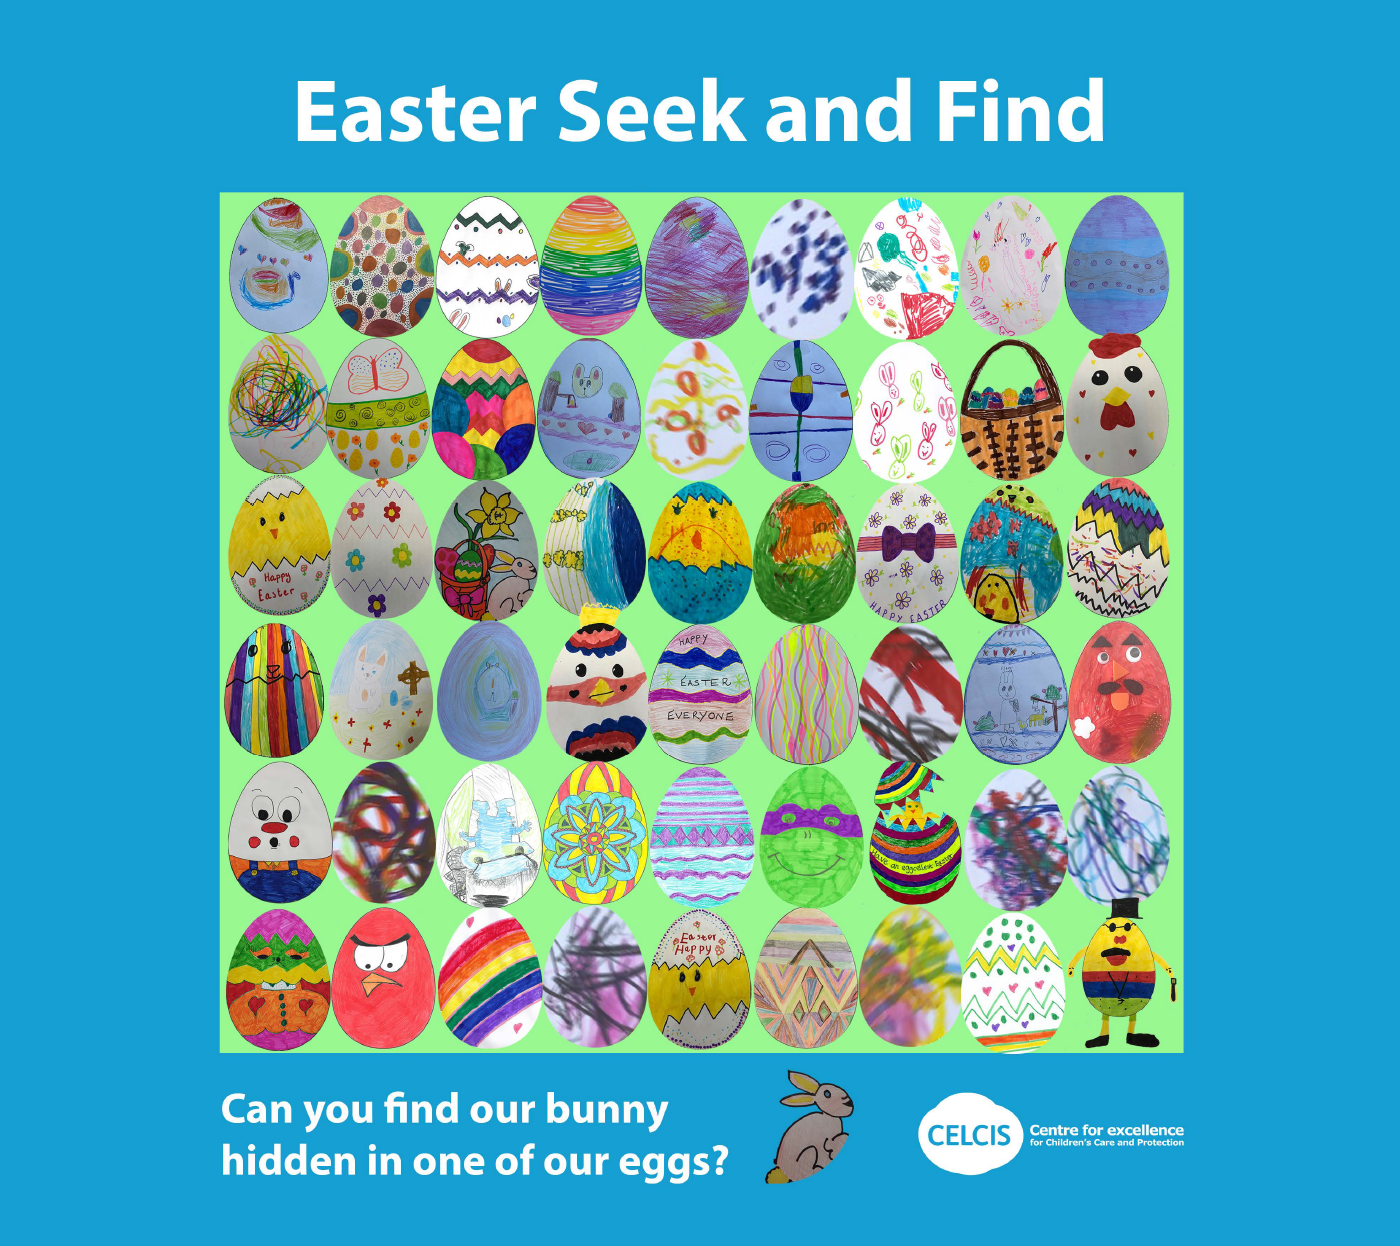 Can you find the easter bunny?